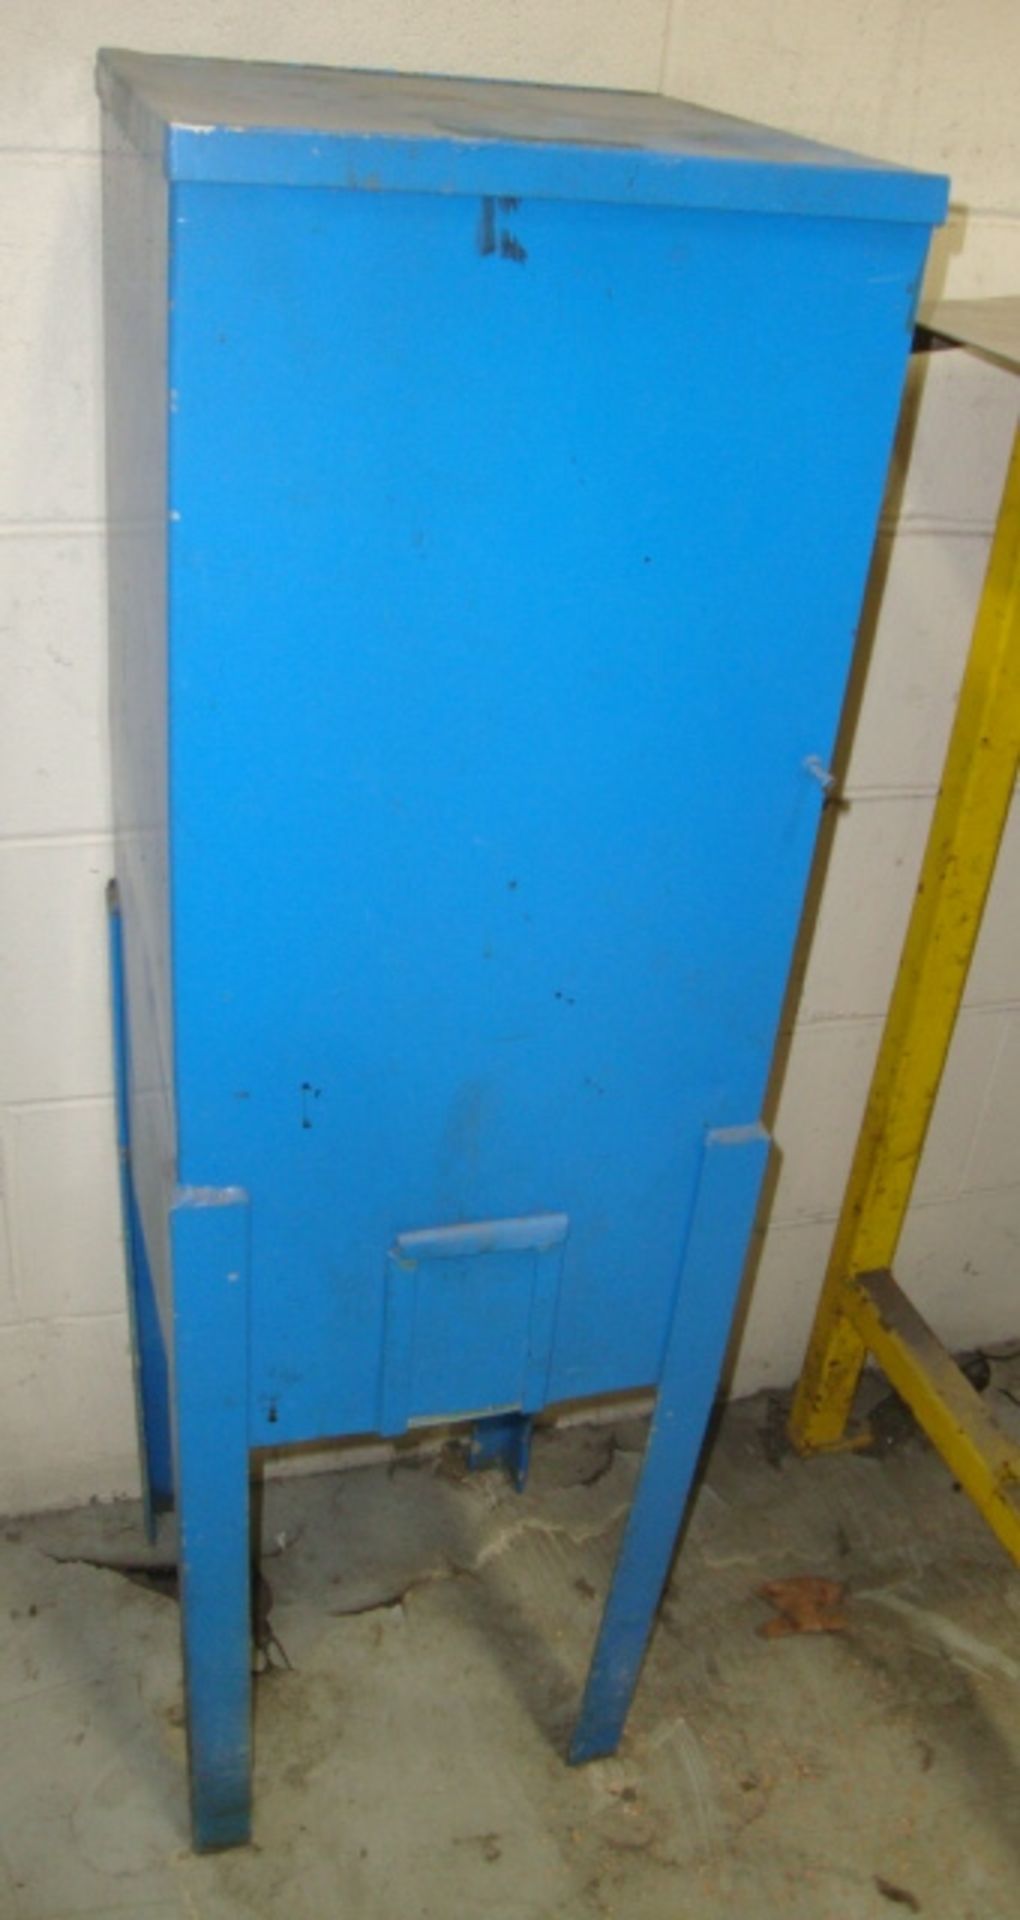 Floor Dry Gravity Feed Hopper, approx. 12" x 42" tall